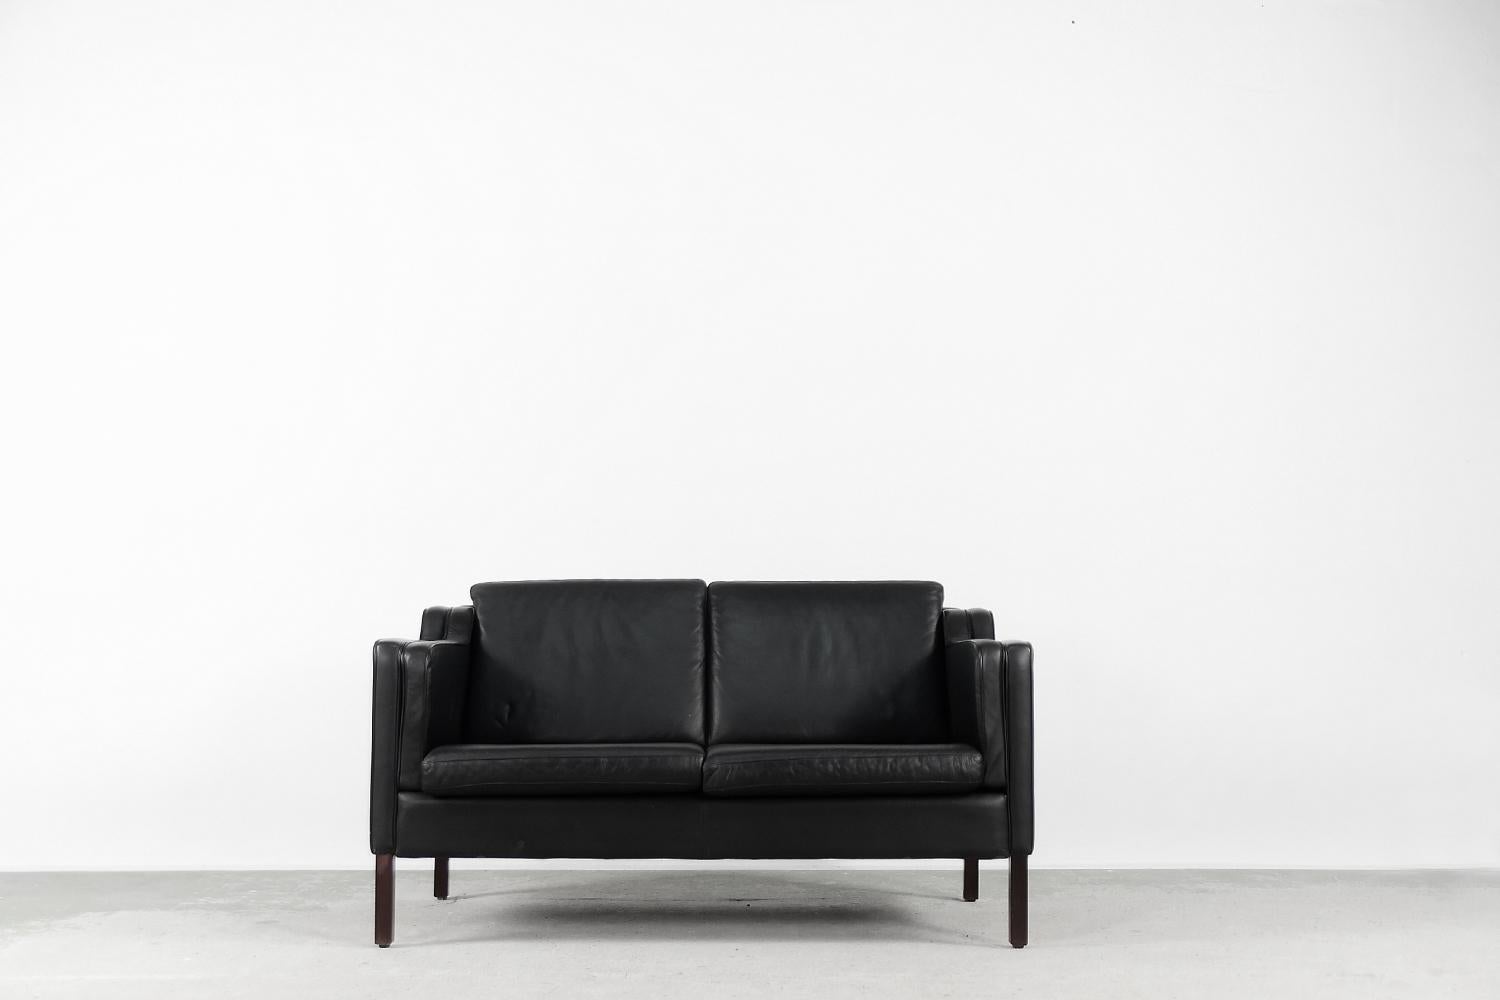 This elegant, two-seater sofa was produced by the Danish Stouby manufacture in the second half of the 20th century. This design was made according to the model 2212 designed by Børge Mogensen for Fredericia. Stouby is a company that has been an